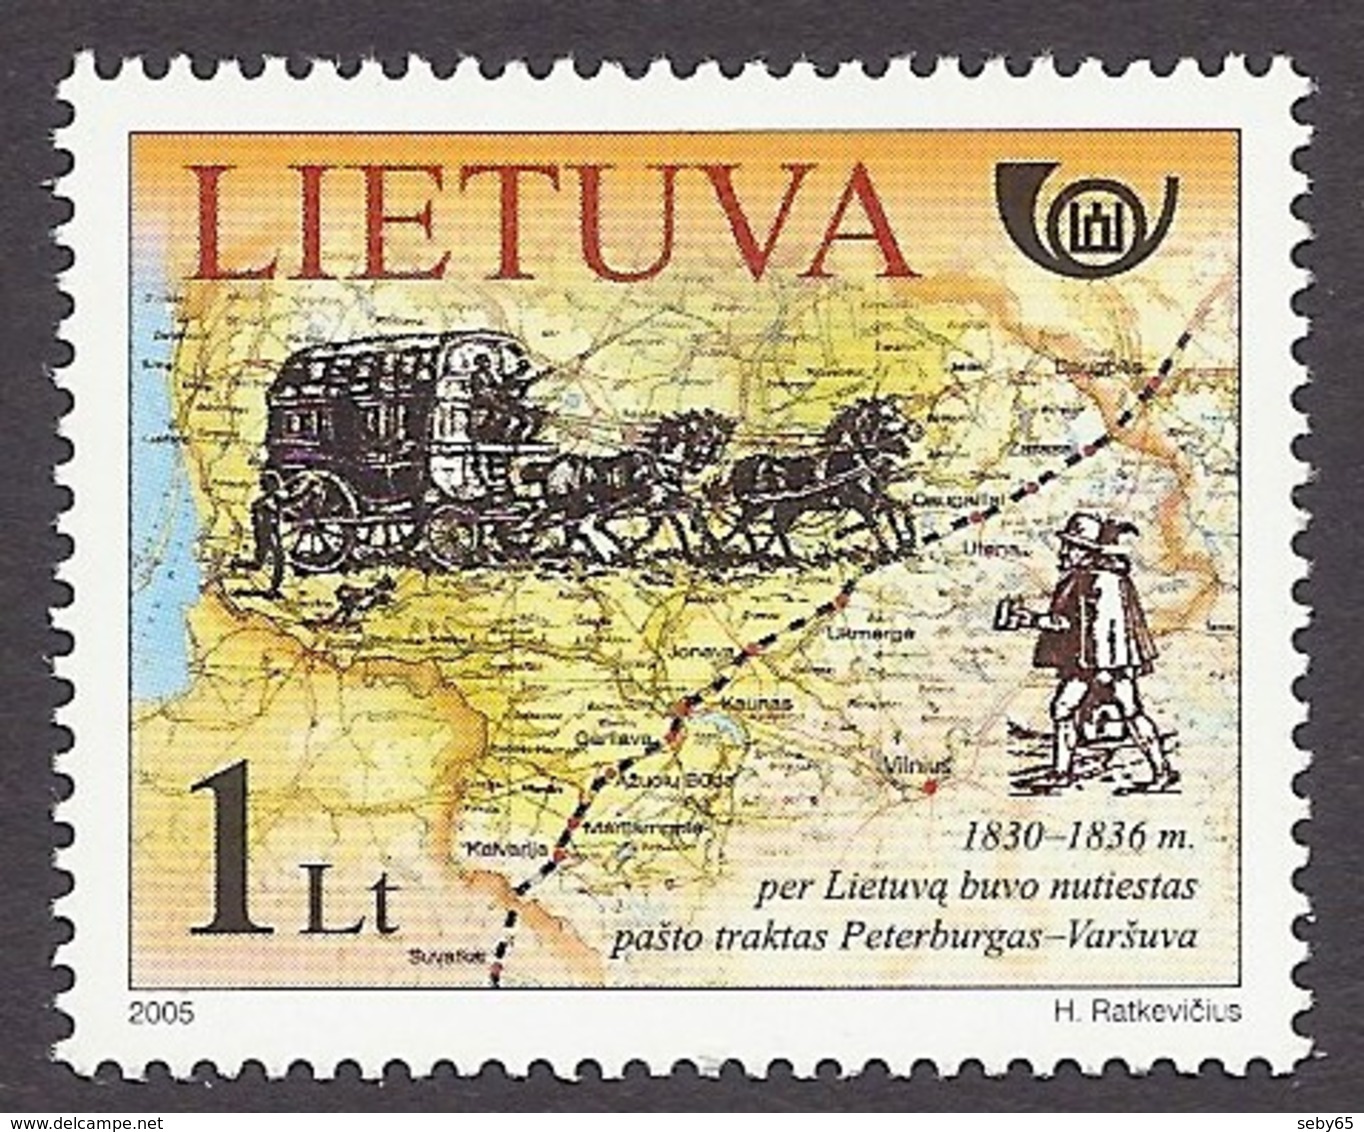 Lithuania / Lietuva 2005 Postal History - Diligence, Horses, Ancient Map, Route St. Petersburg - Warsaw MNH - Lituanie